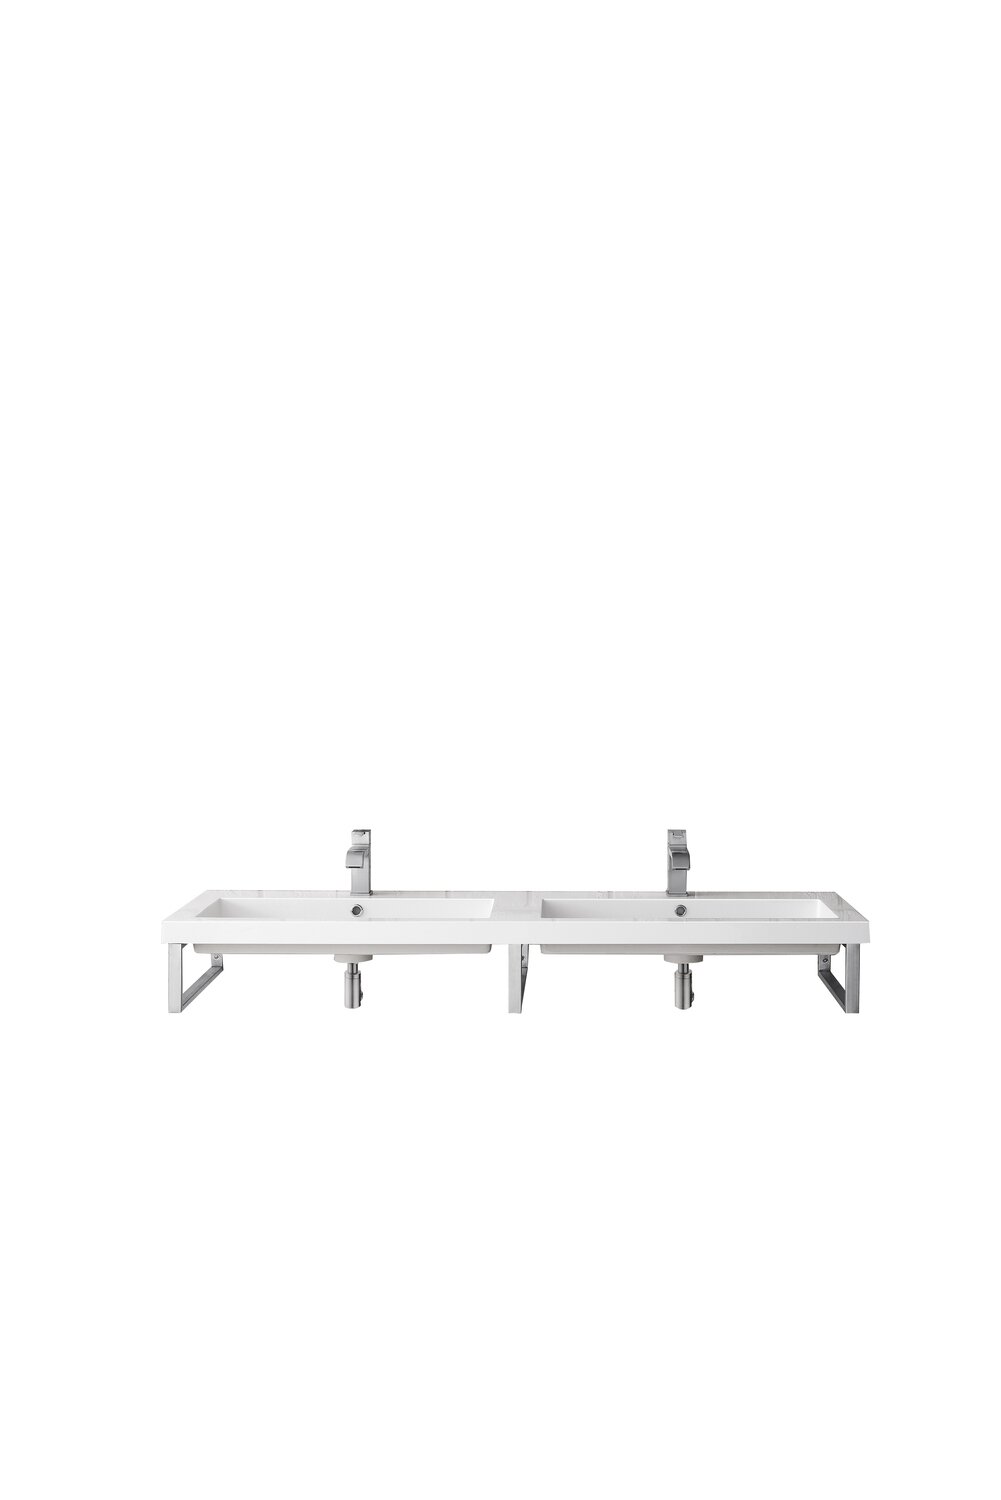 JAMES MARTIN - Three Boston 18&quot; Wall Brackets, Brushed Nickel w/ 63&quot; White Glossy Composite Stone Top 055BK18BNK63WG2